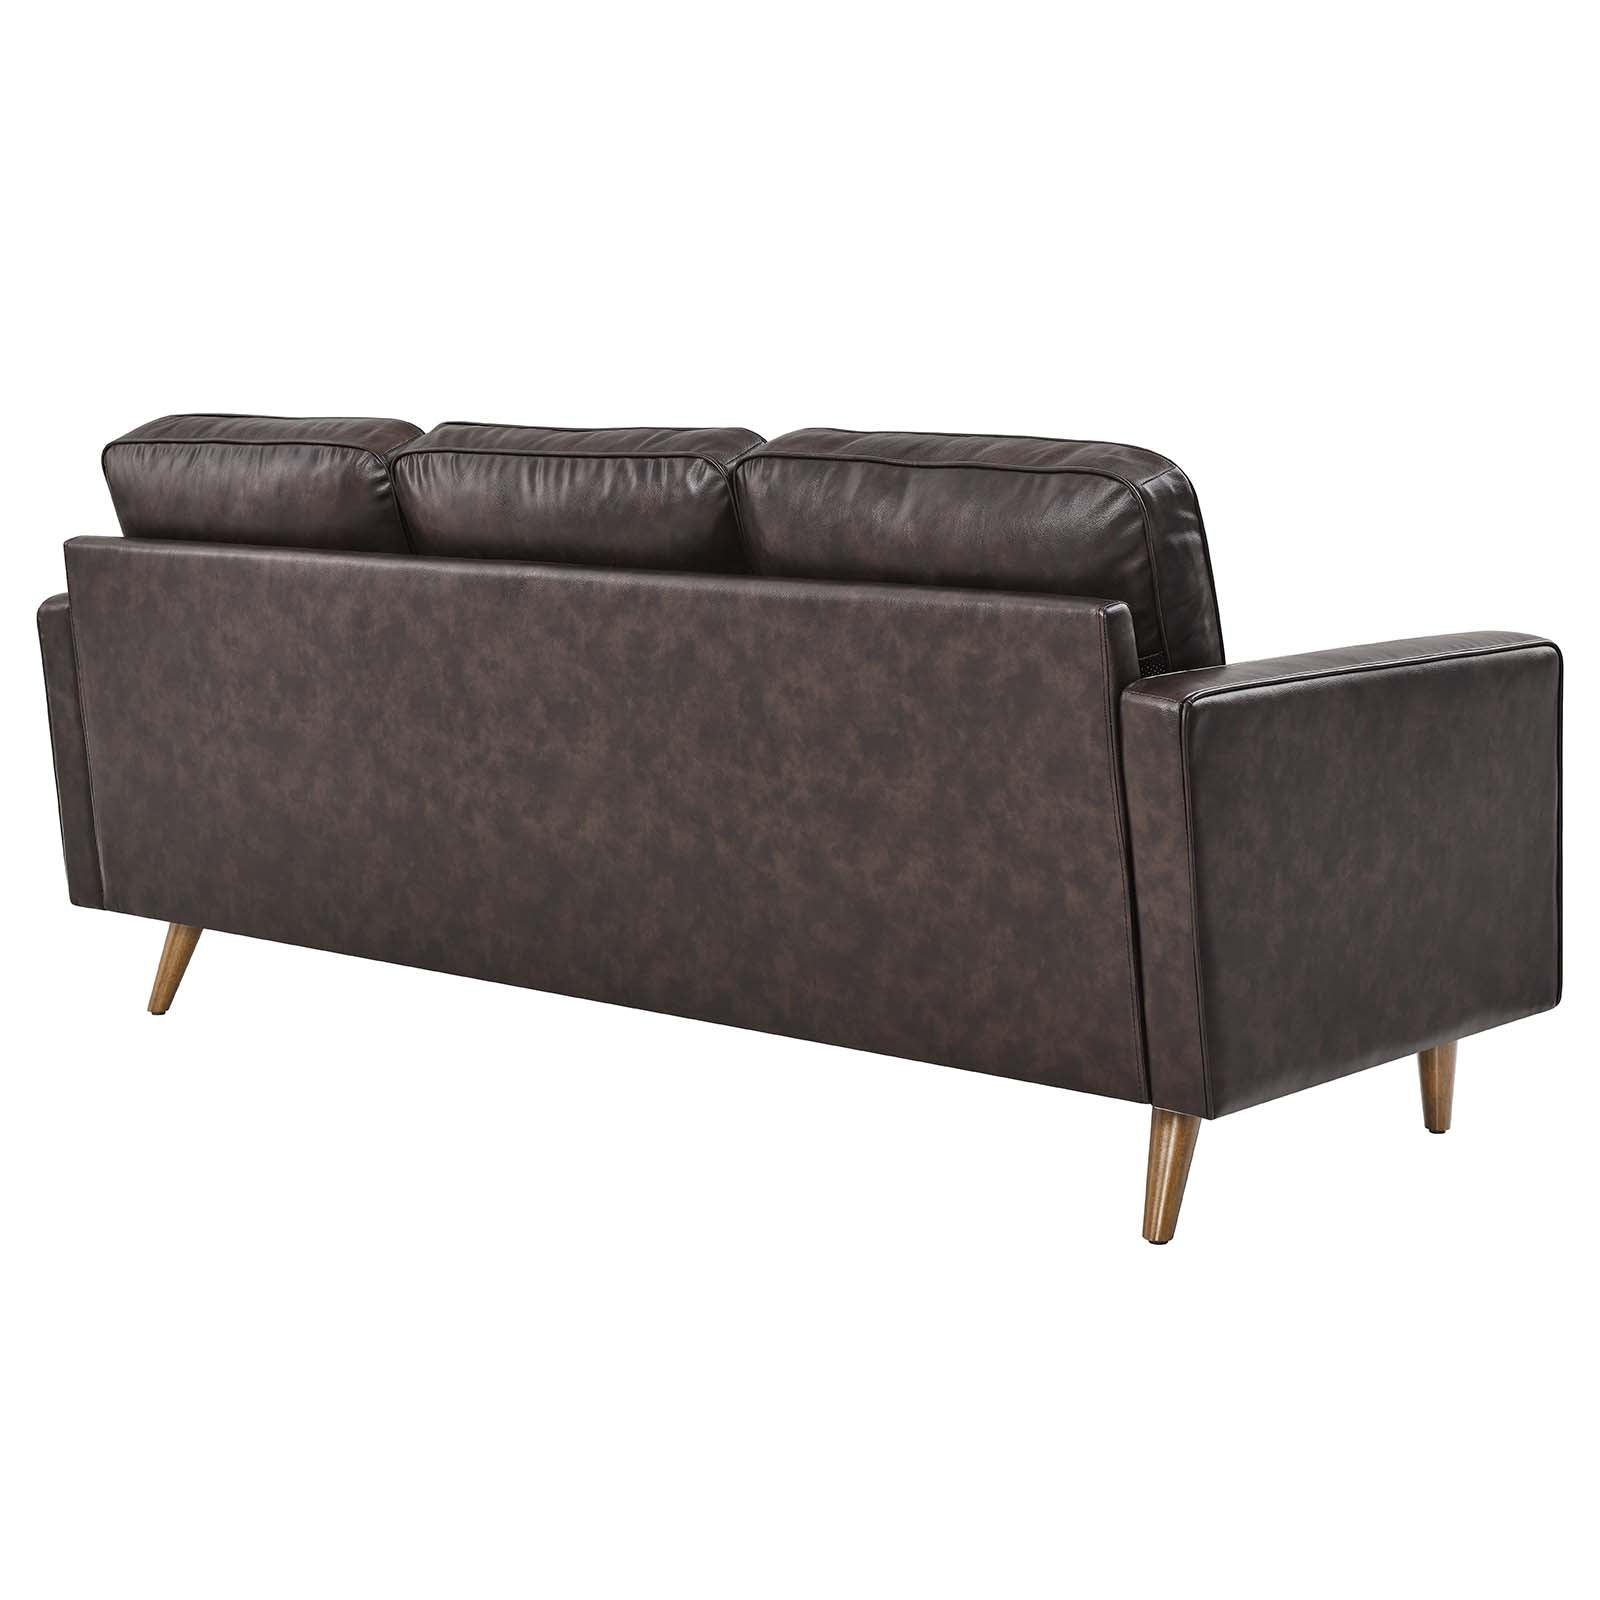 Modway Sectional Sofas - Valour 78" Leather Apartment Sectional Sofa Brown